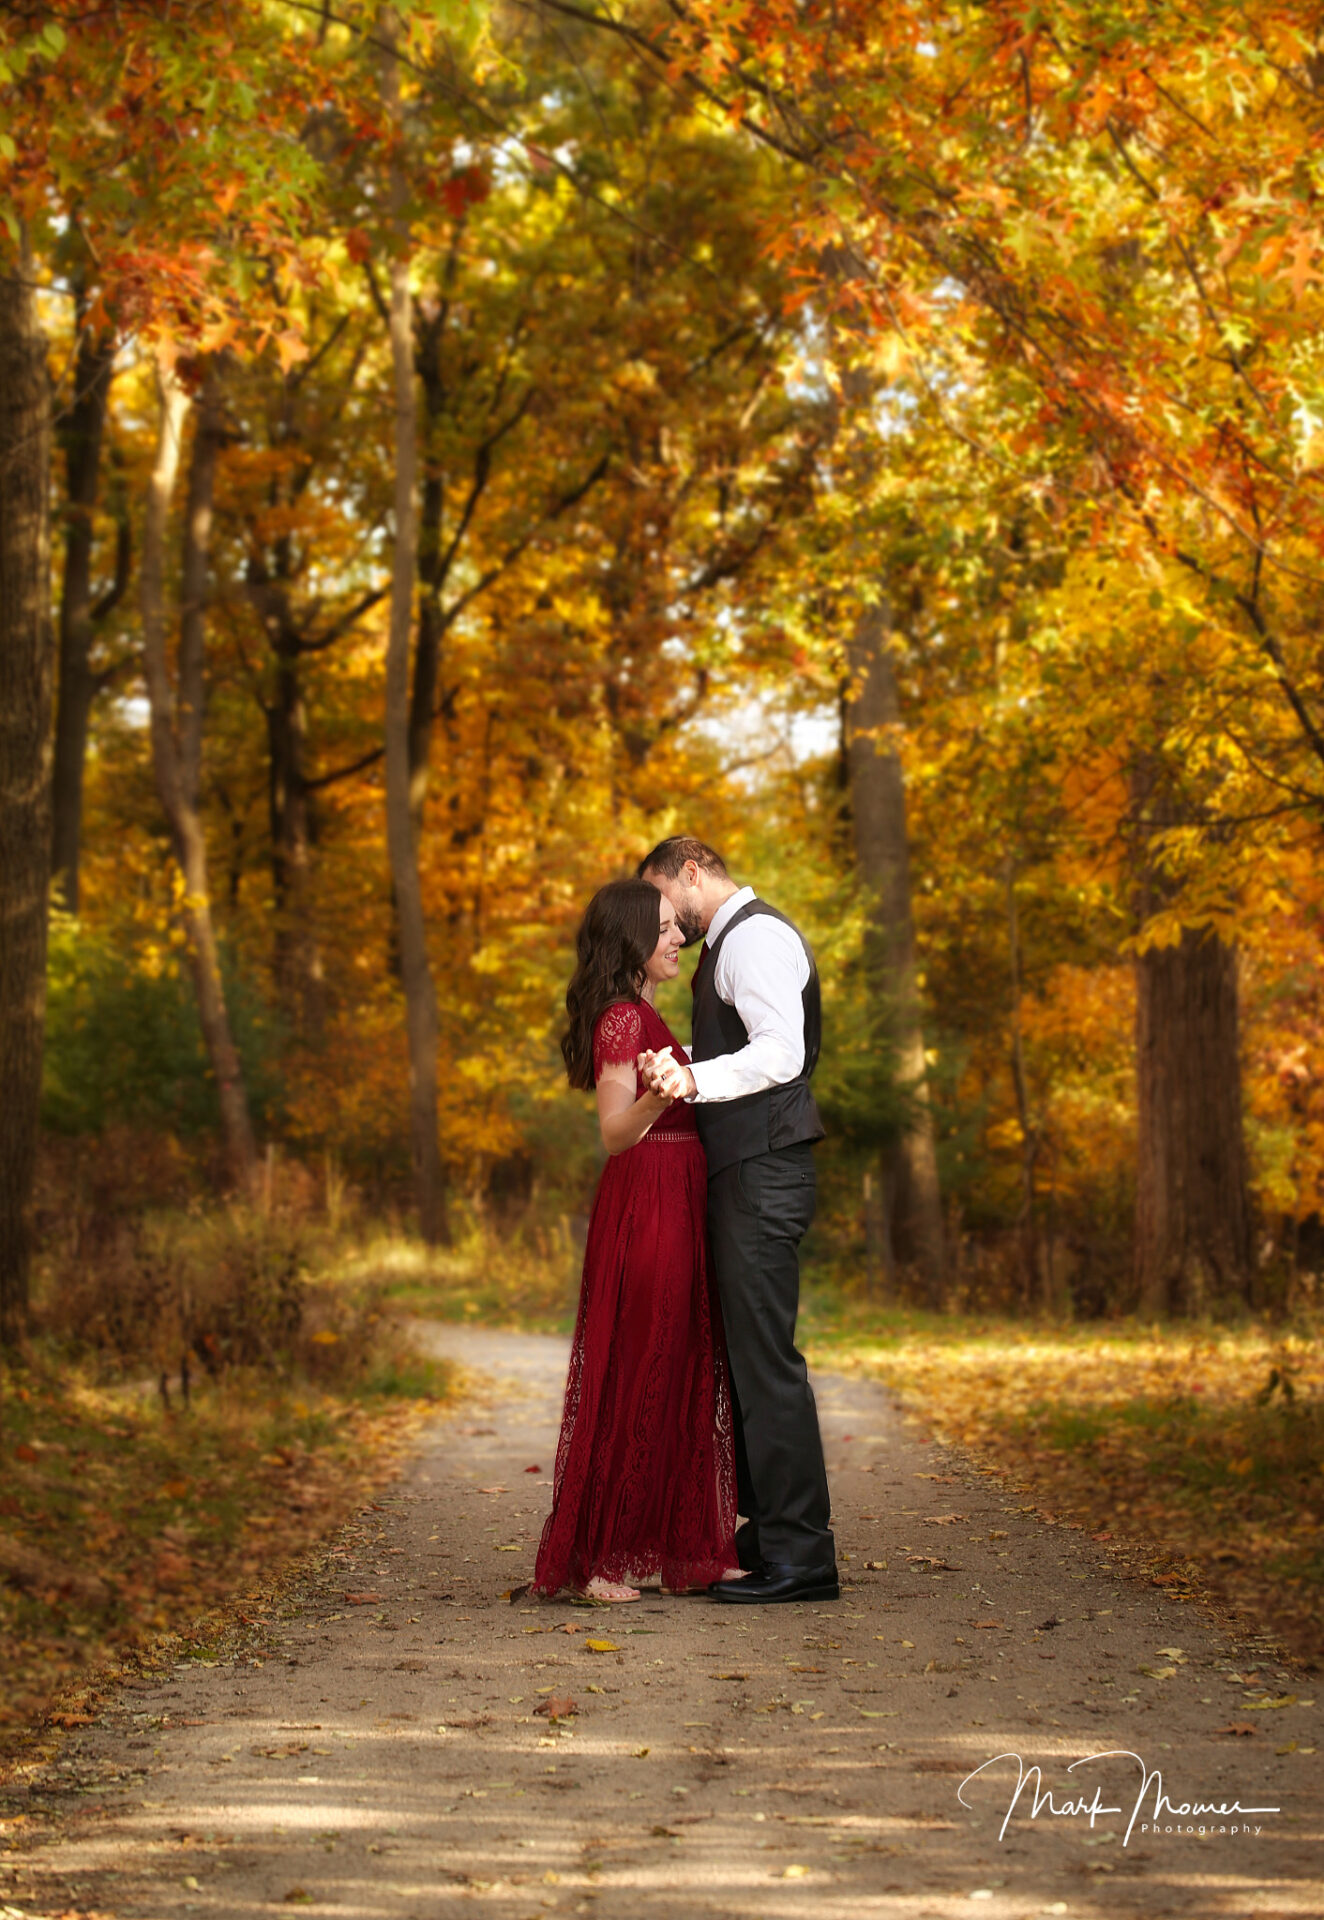 beautiful fall portrait in the forest with a couple in love